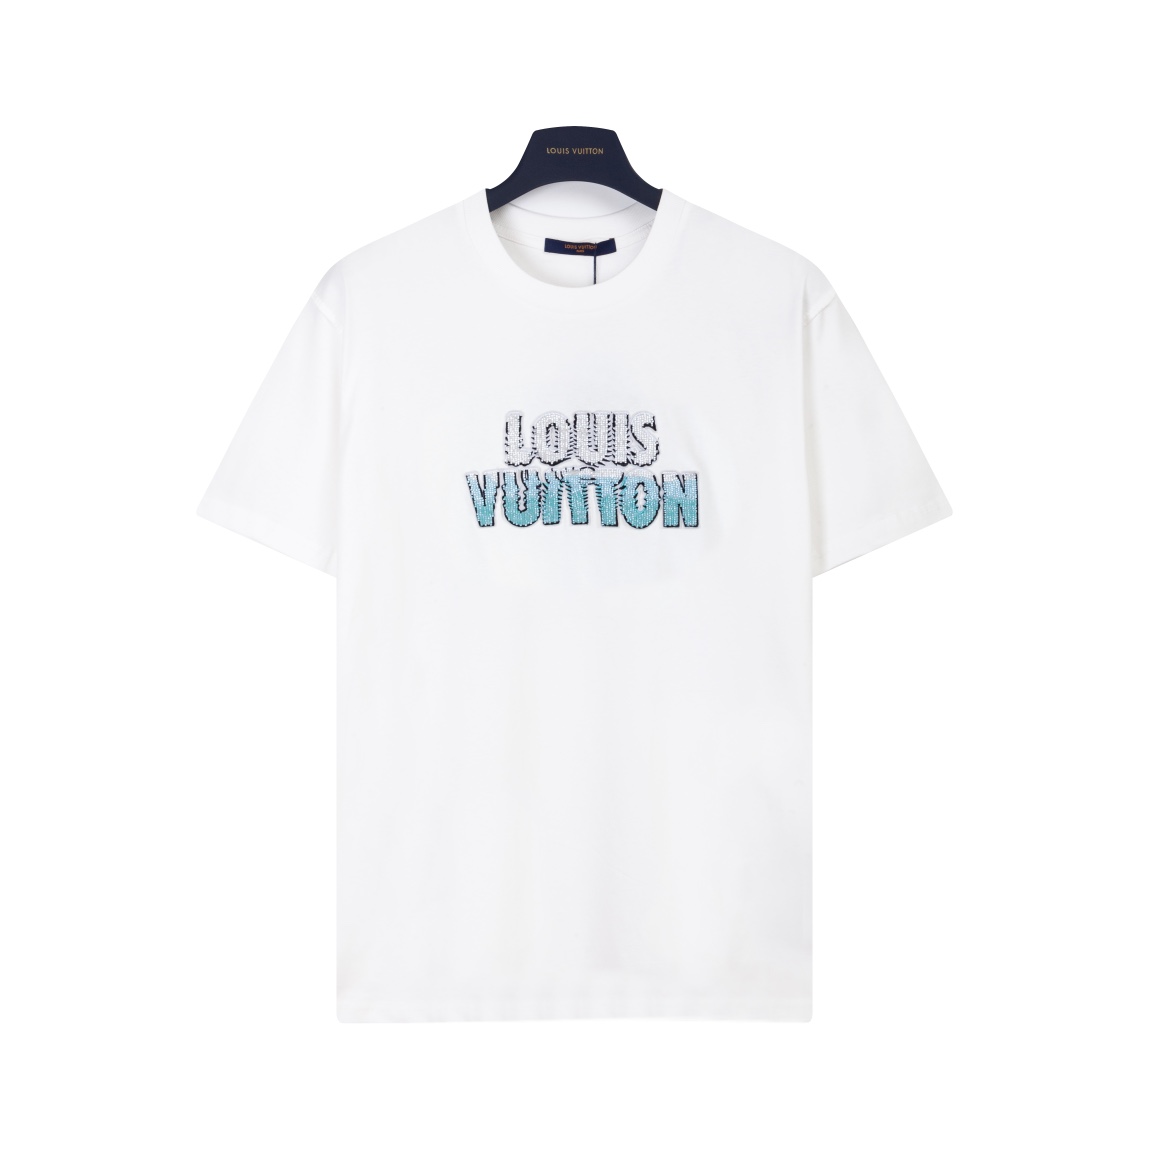 Louis Vuitton Perfect
 Clothing T-Shirt White Embroidery Unisex Cotton Spring/Summer Collection Short Sleeve